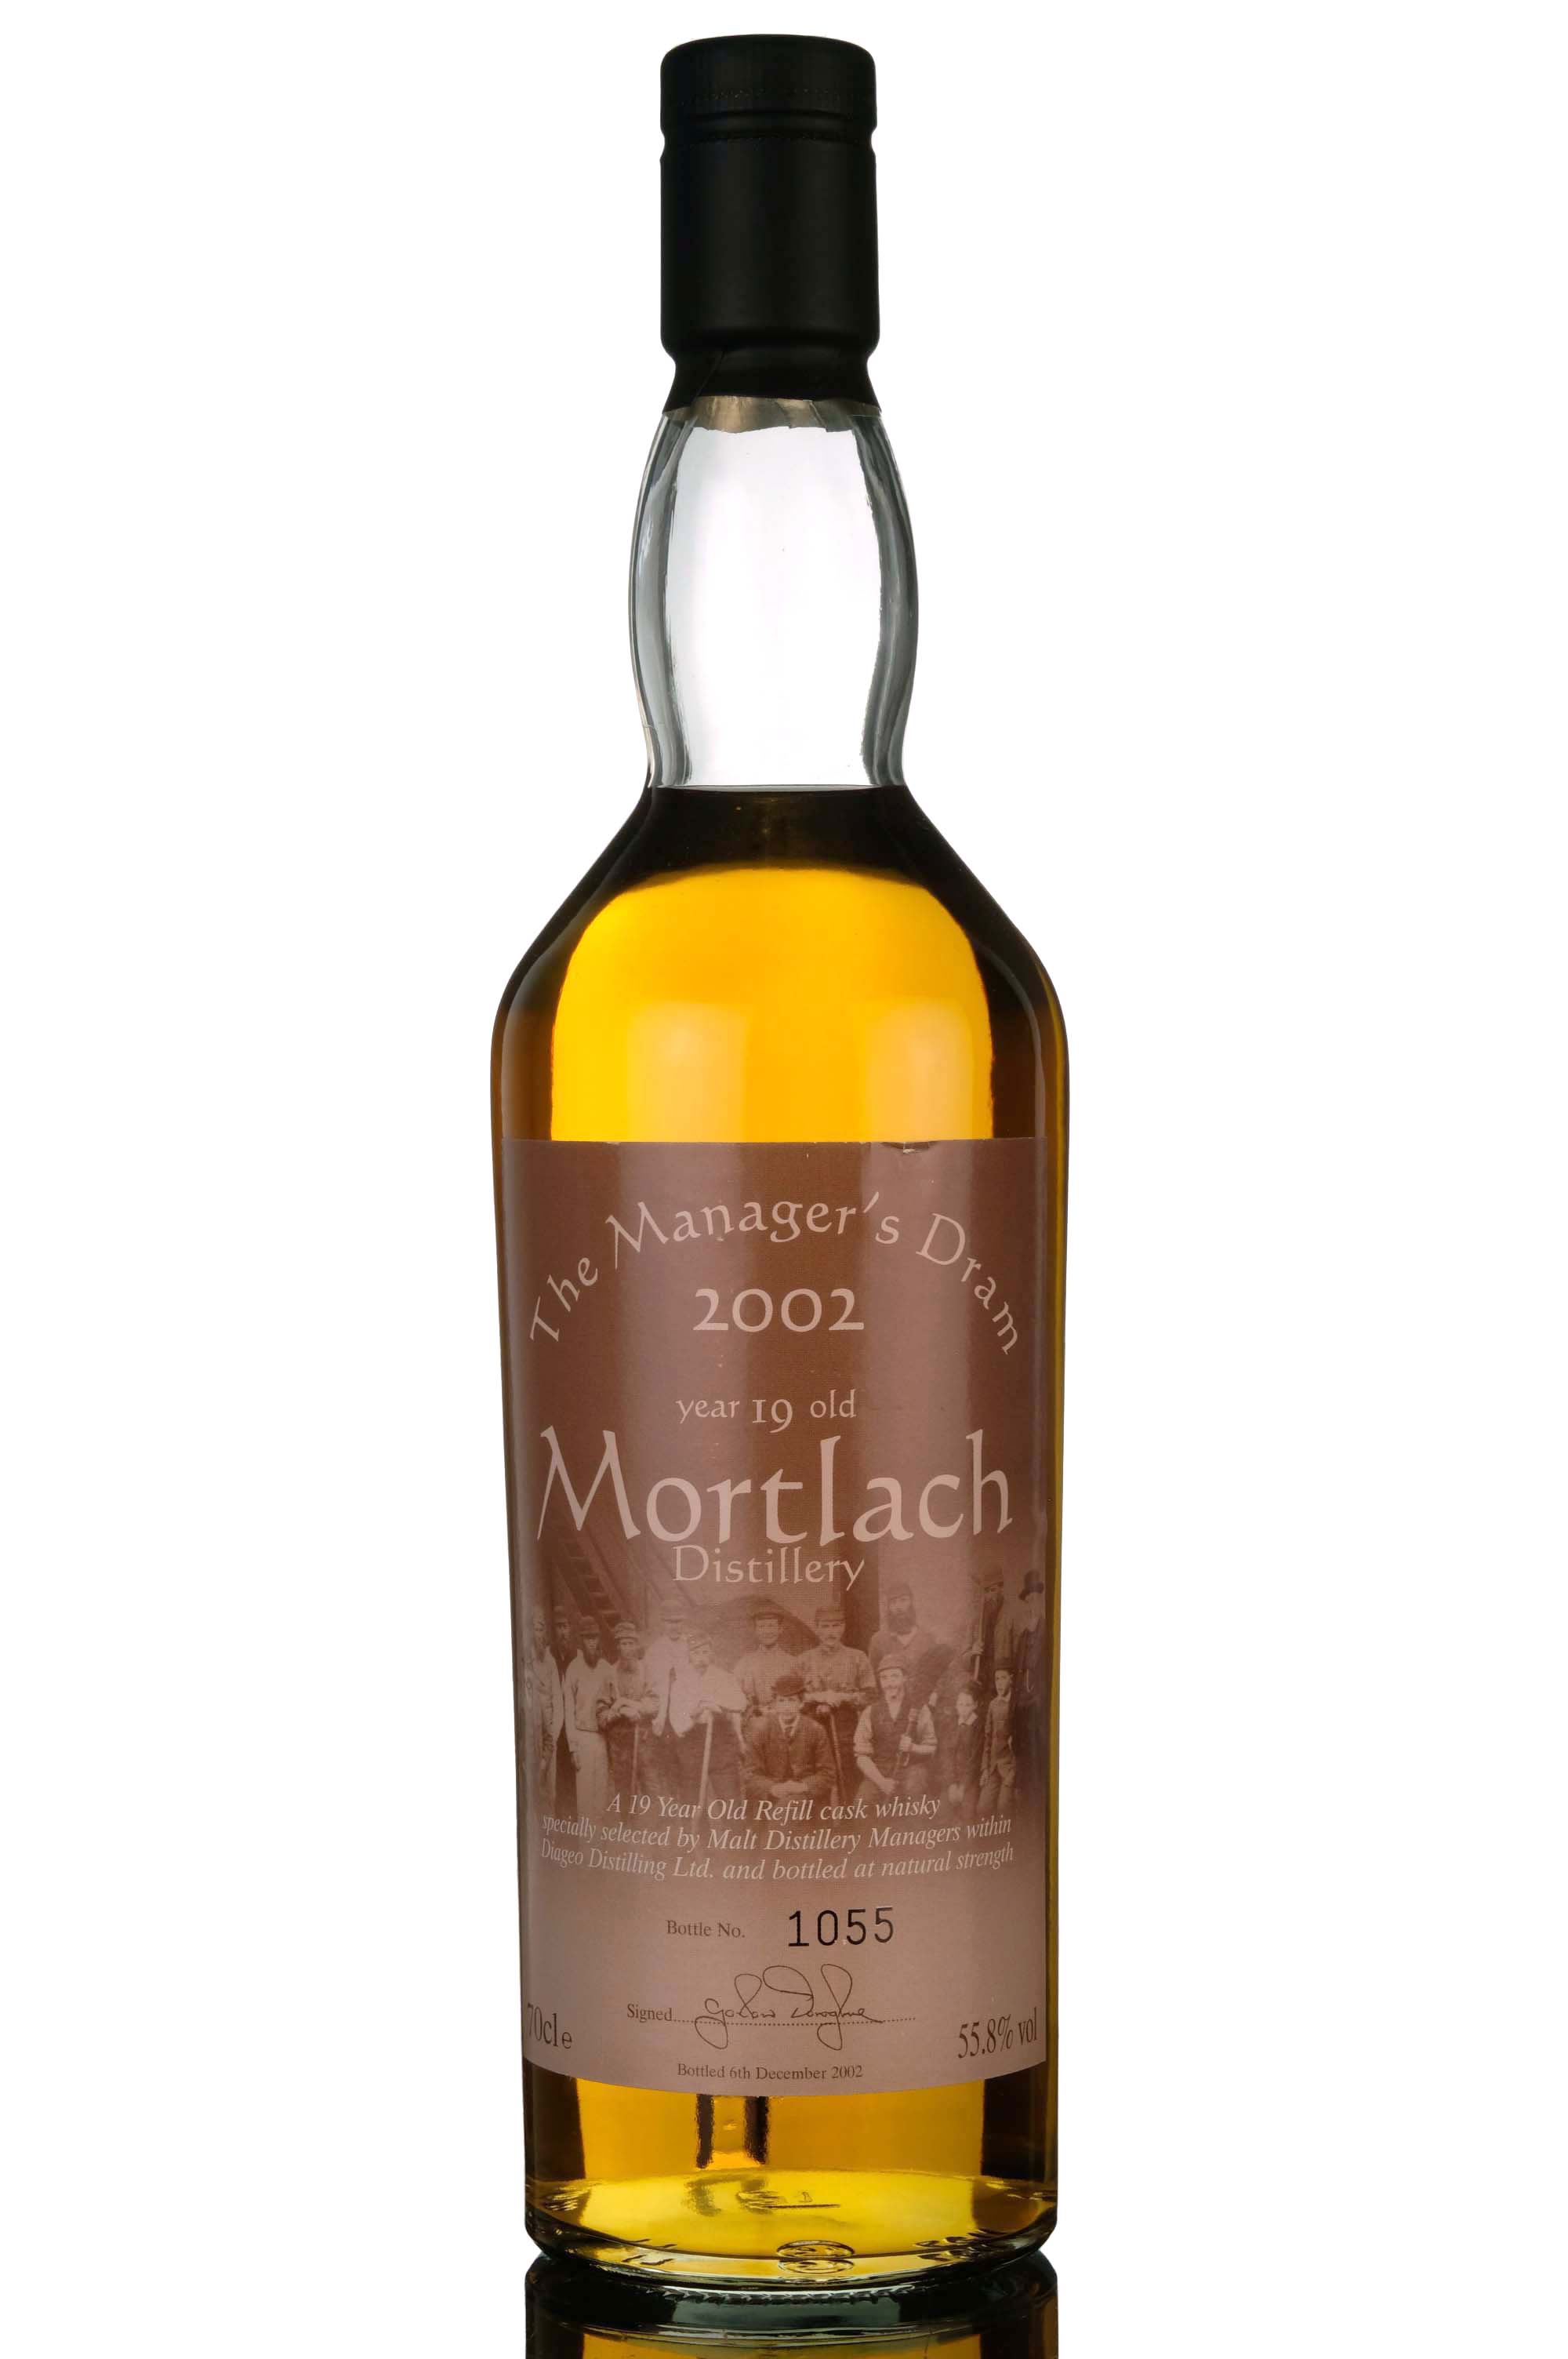 Mortlach 19 Year Old - Managers Dram 2002